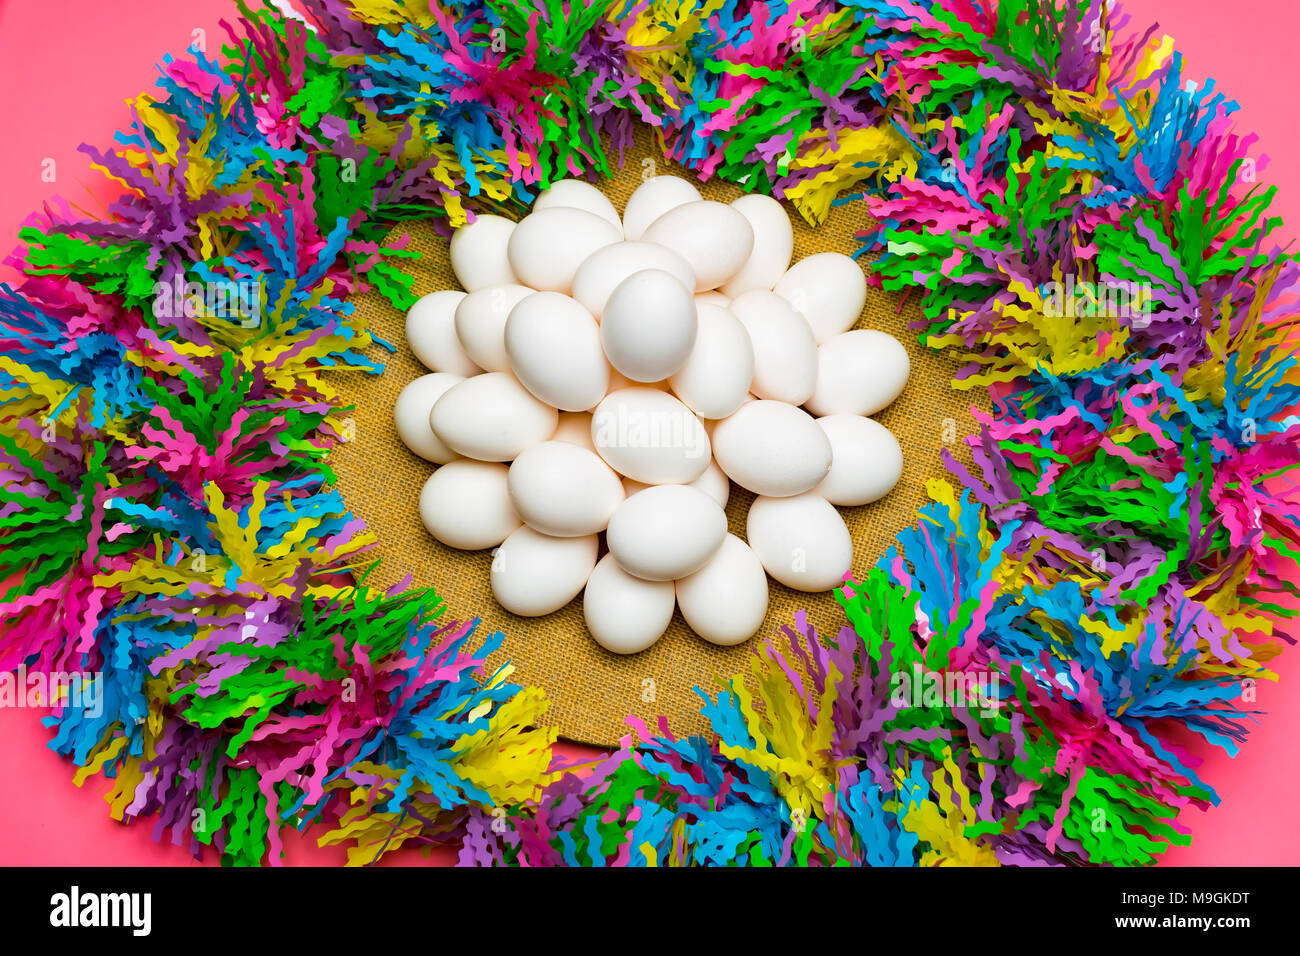 Nice plate of 2 dozen uncolored Easter eggs with pastel color background. Stock Photo